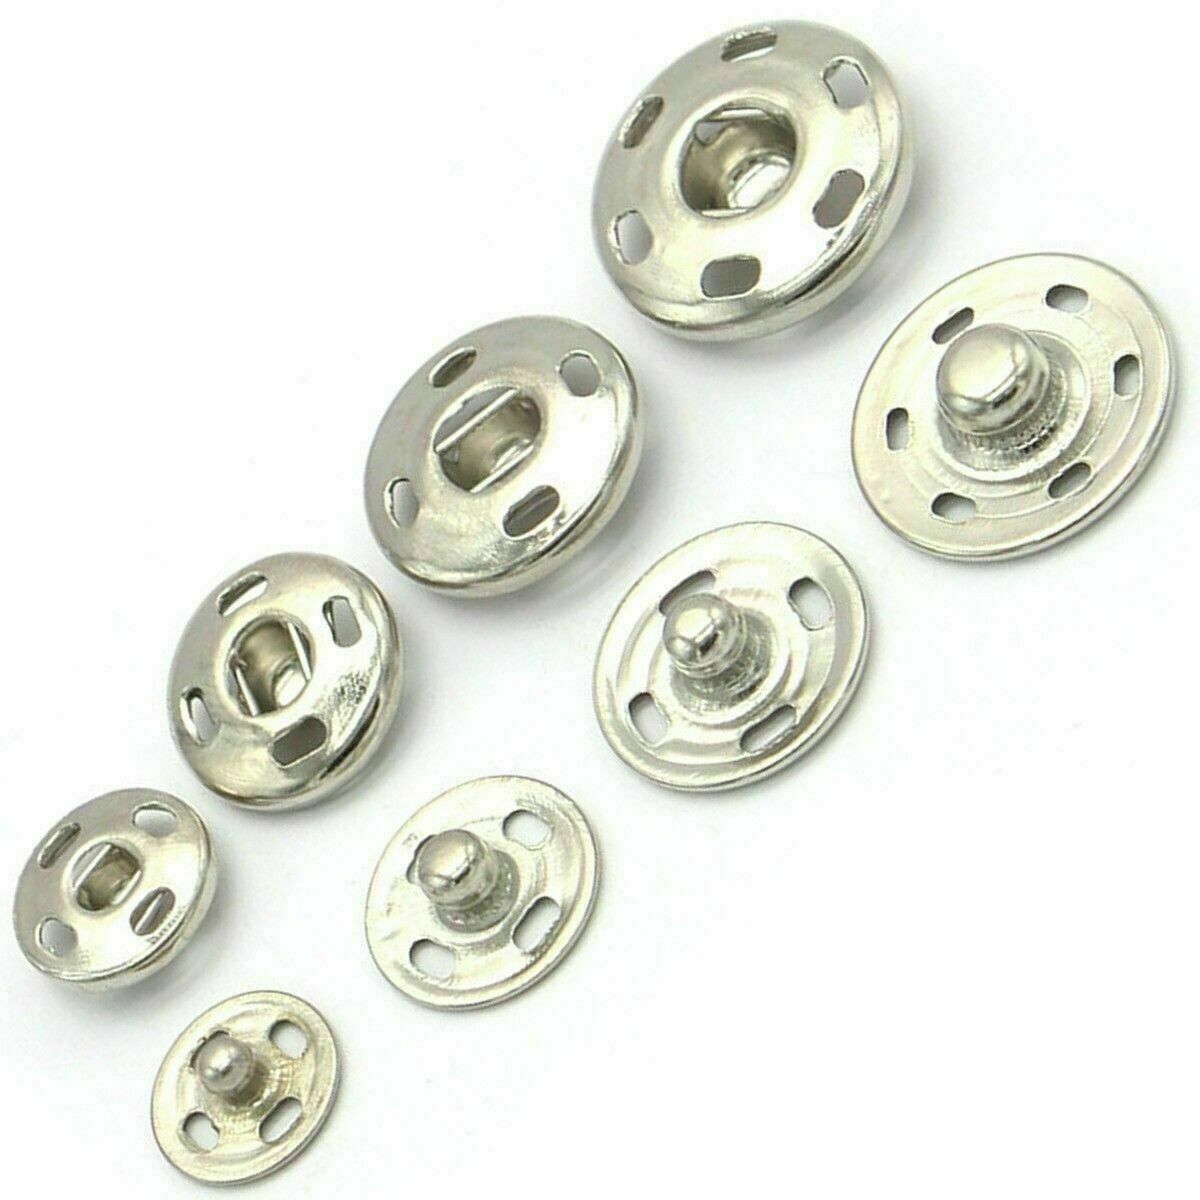 20 Pack Metal Press Studs Snap Fasteners Sewing Popper Tich Buttons Dressmaking - ZYBUX